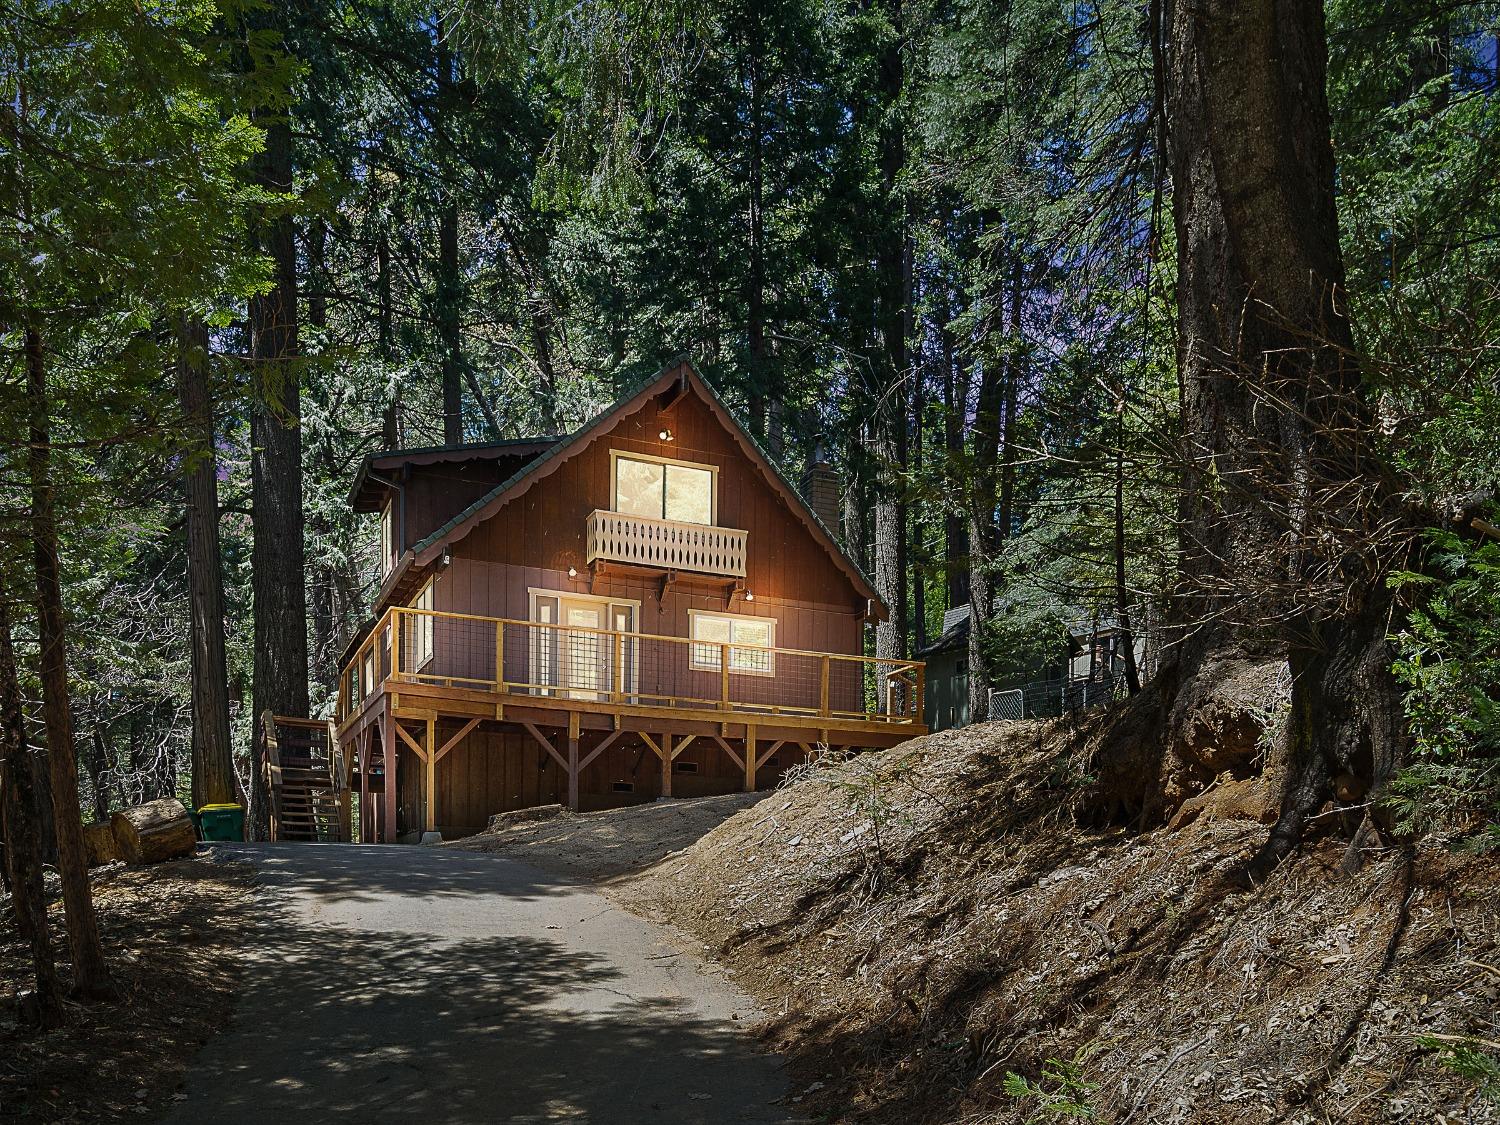 Photo of 3241 Amber Trl in Pollock Pines, CA